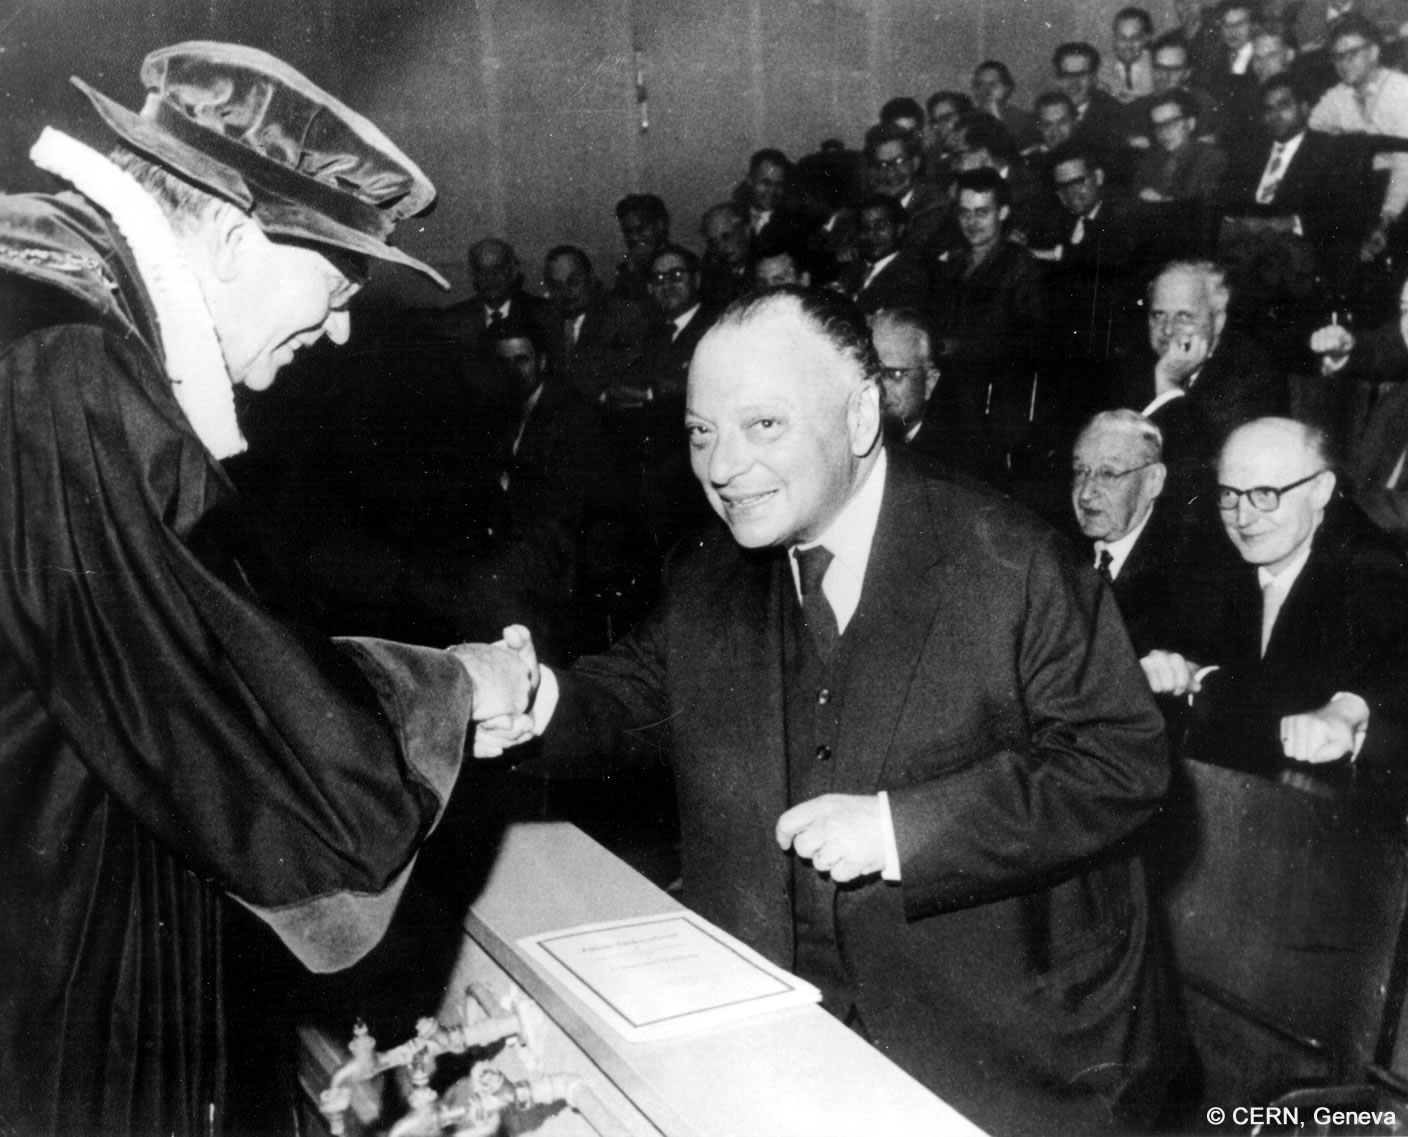 Wolfgang Pauli shakes a man's hand when he is awarded an honorary doctorate. In the background there are numerous sitting men.